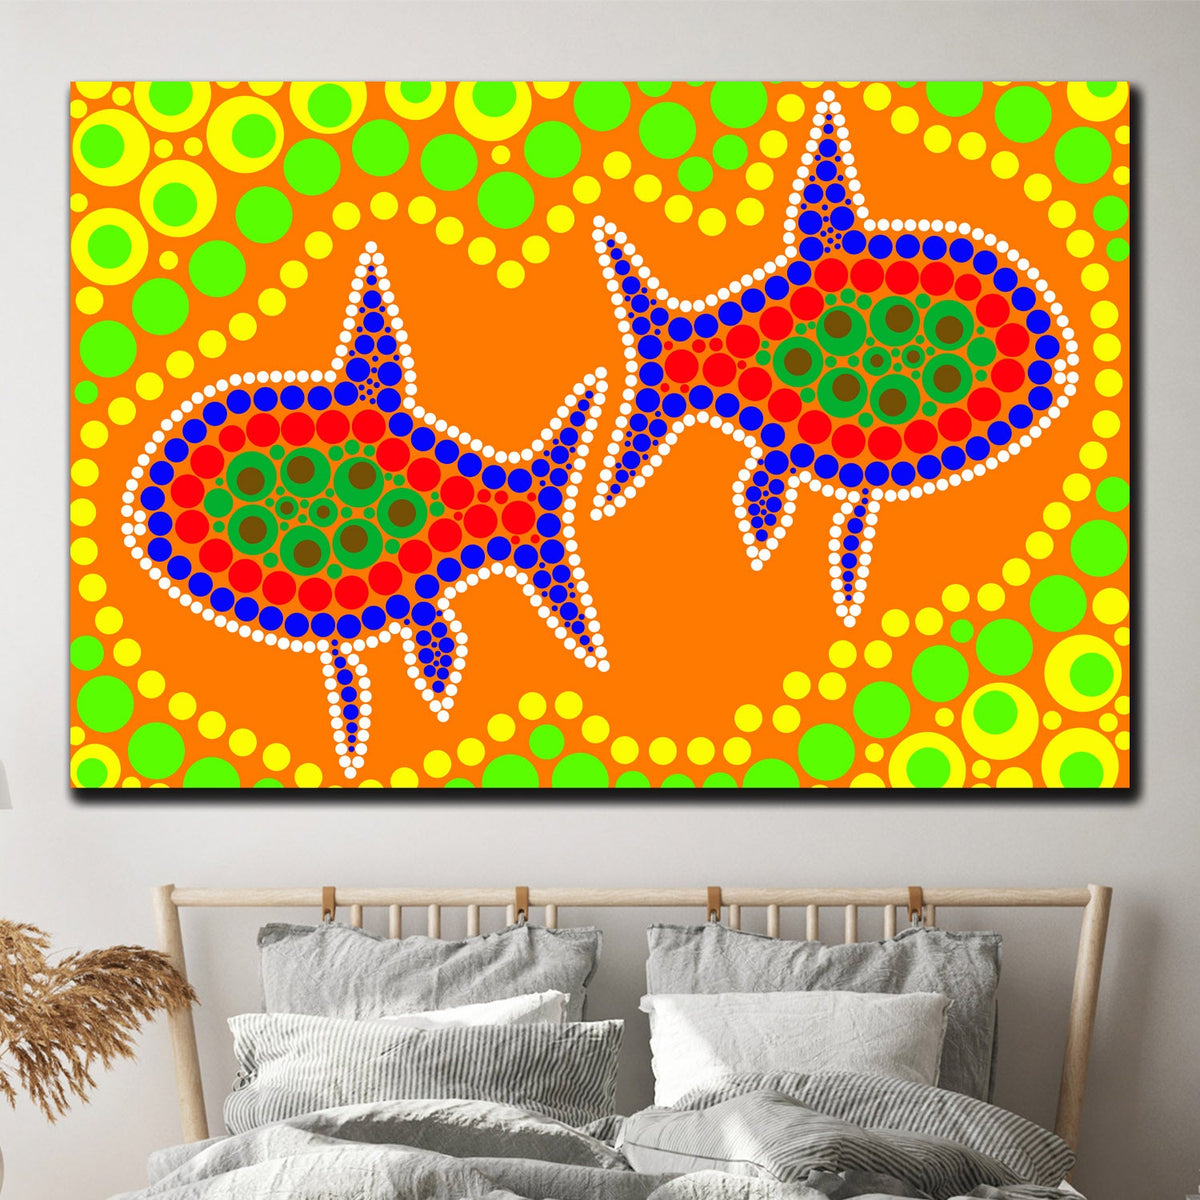 https://cdn.shopify.com/s/files/1/0387/9986/8044/products/ColourfulFishCanvasArtprintStretched-1.jpg